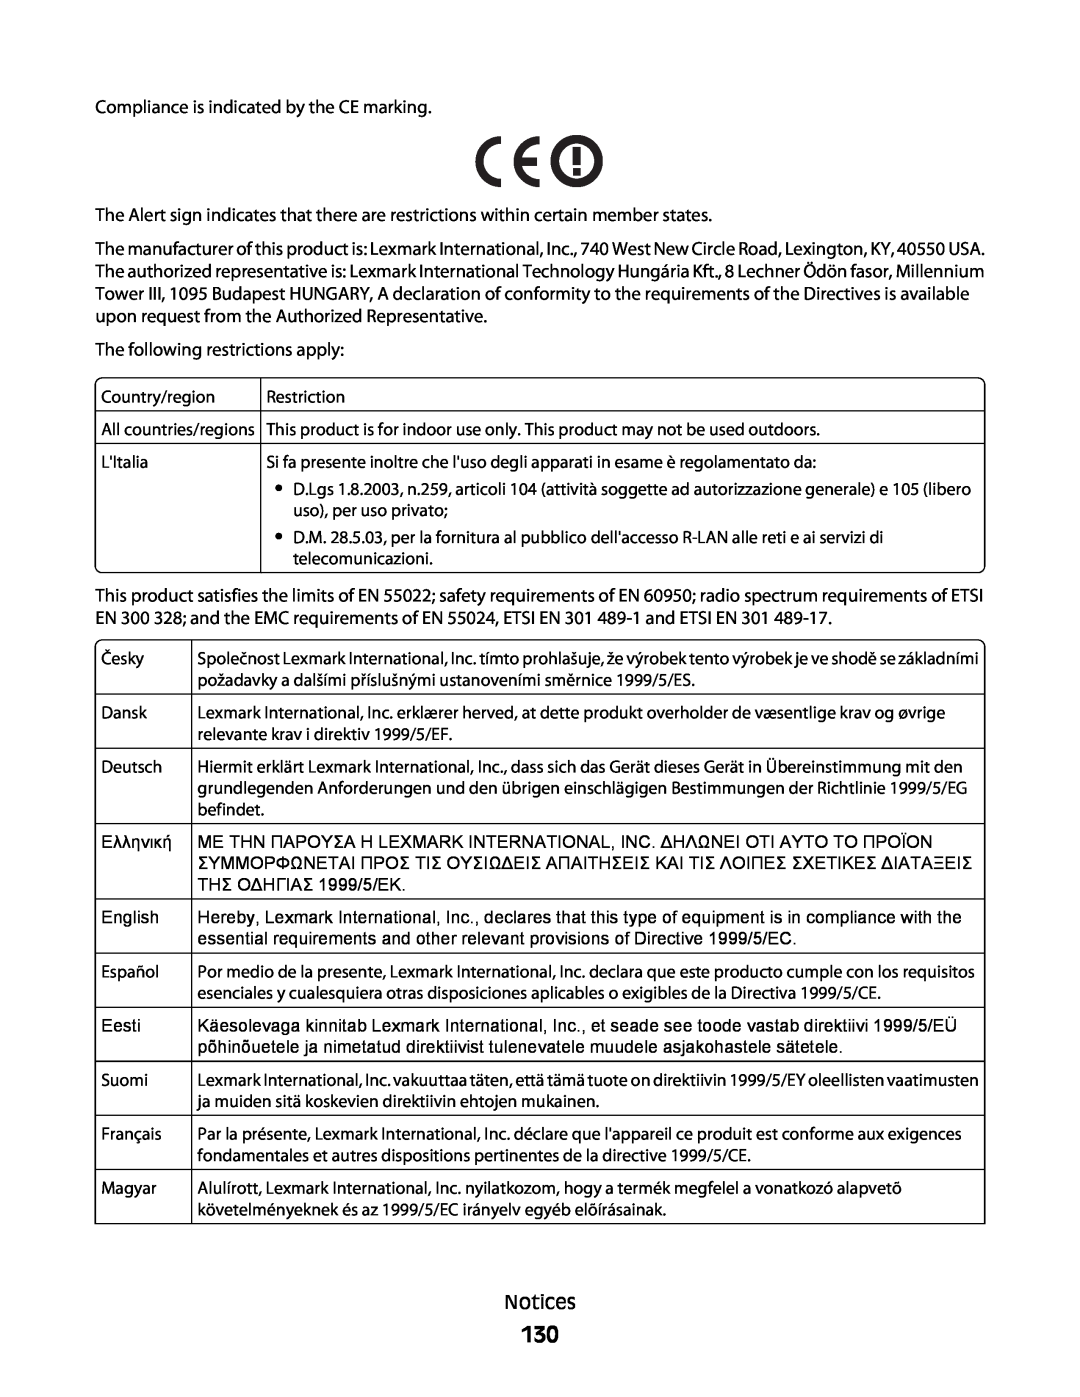 Lexmark 4600, 3600 manual Compliance is indicated by the CE marking, The following restrictions apply, Notices 